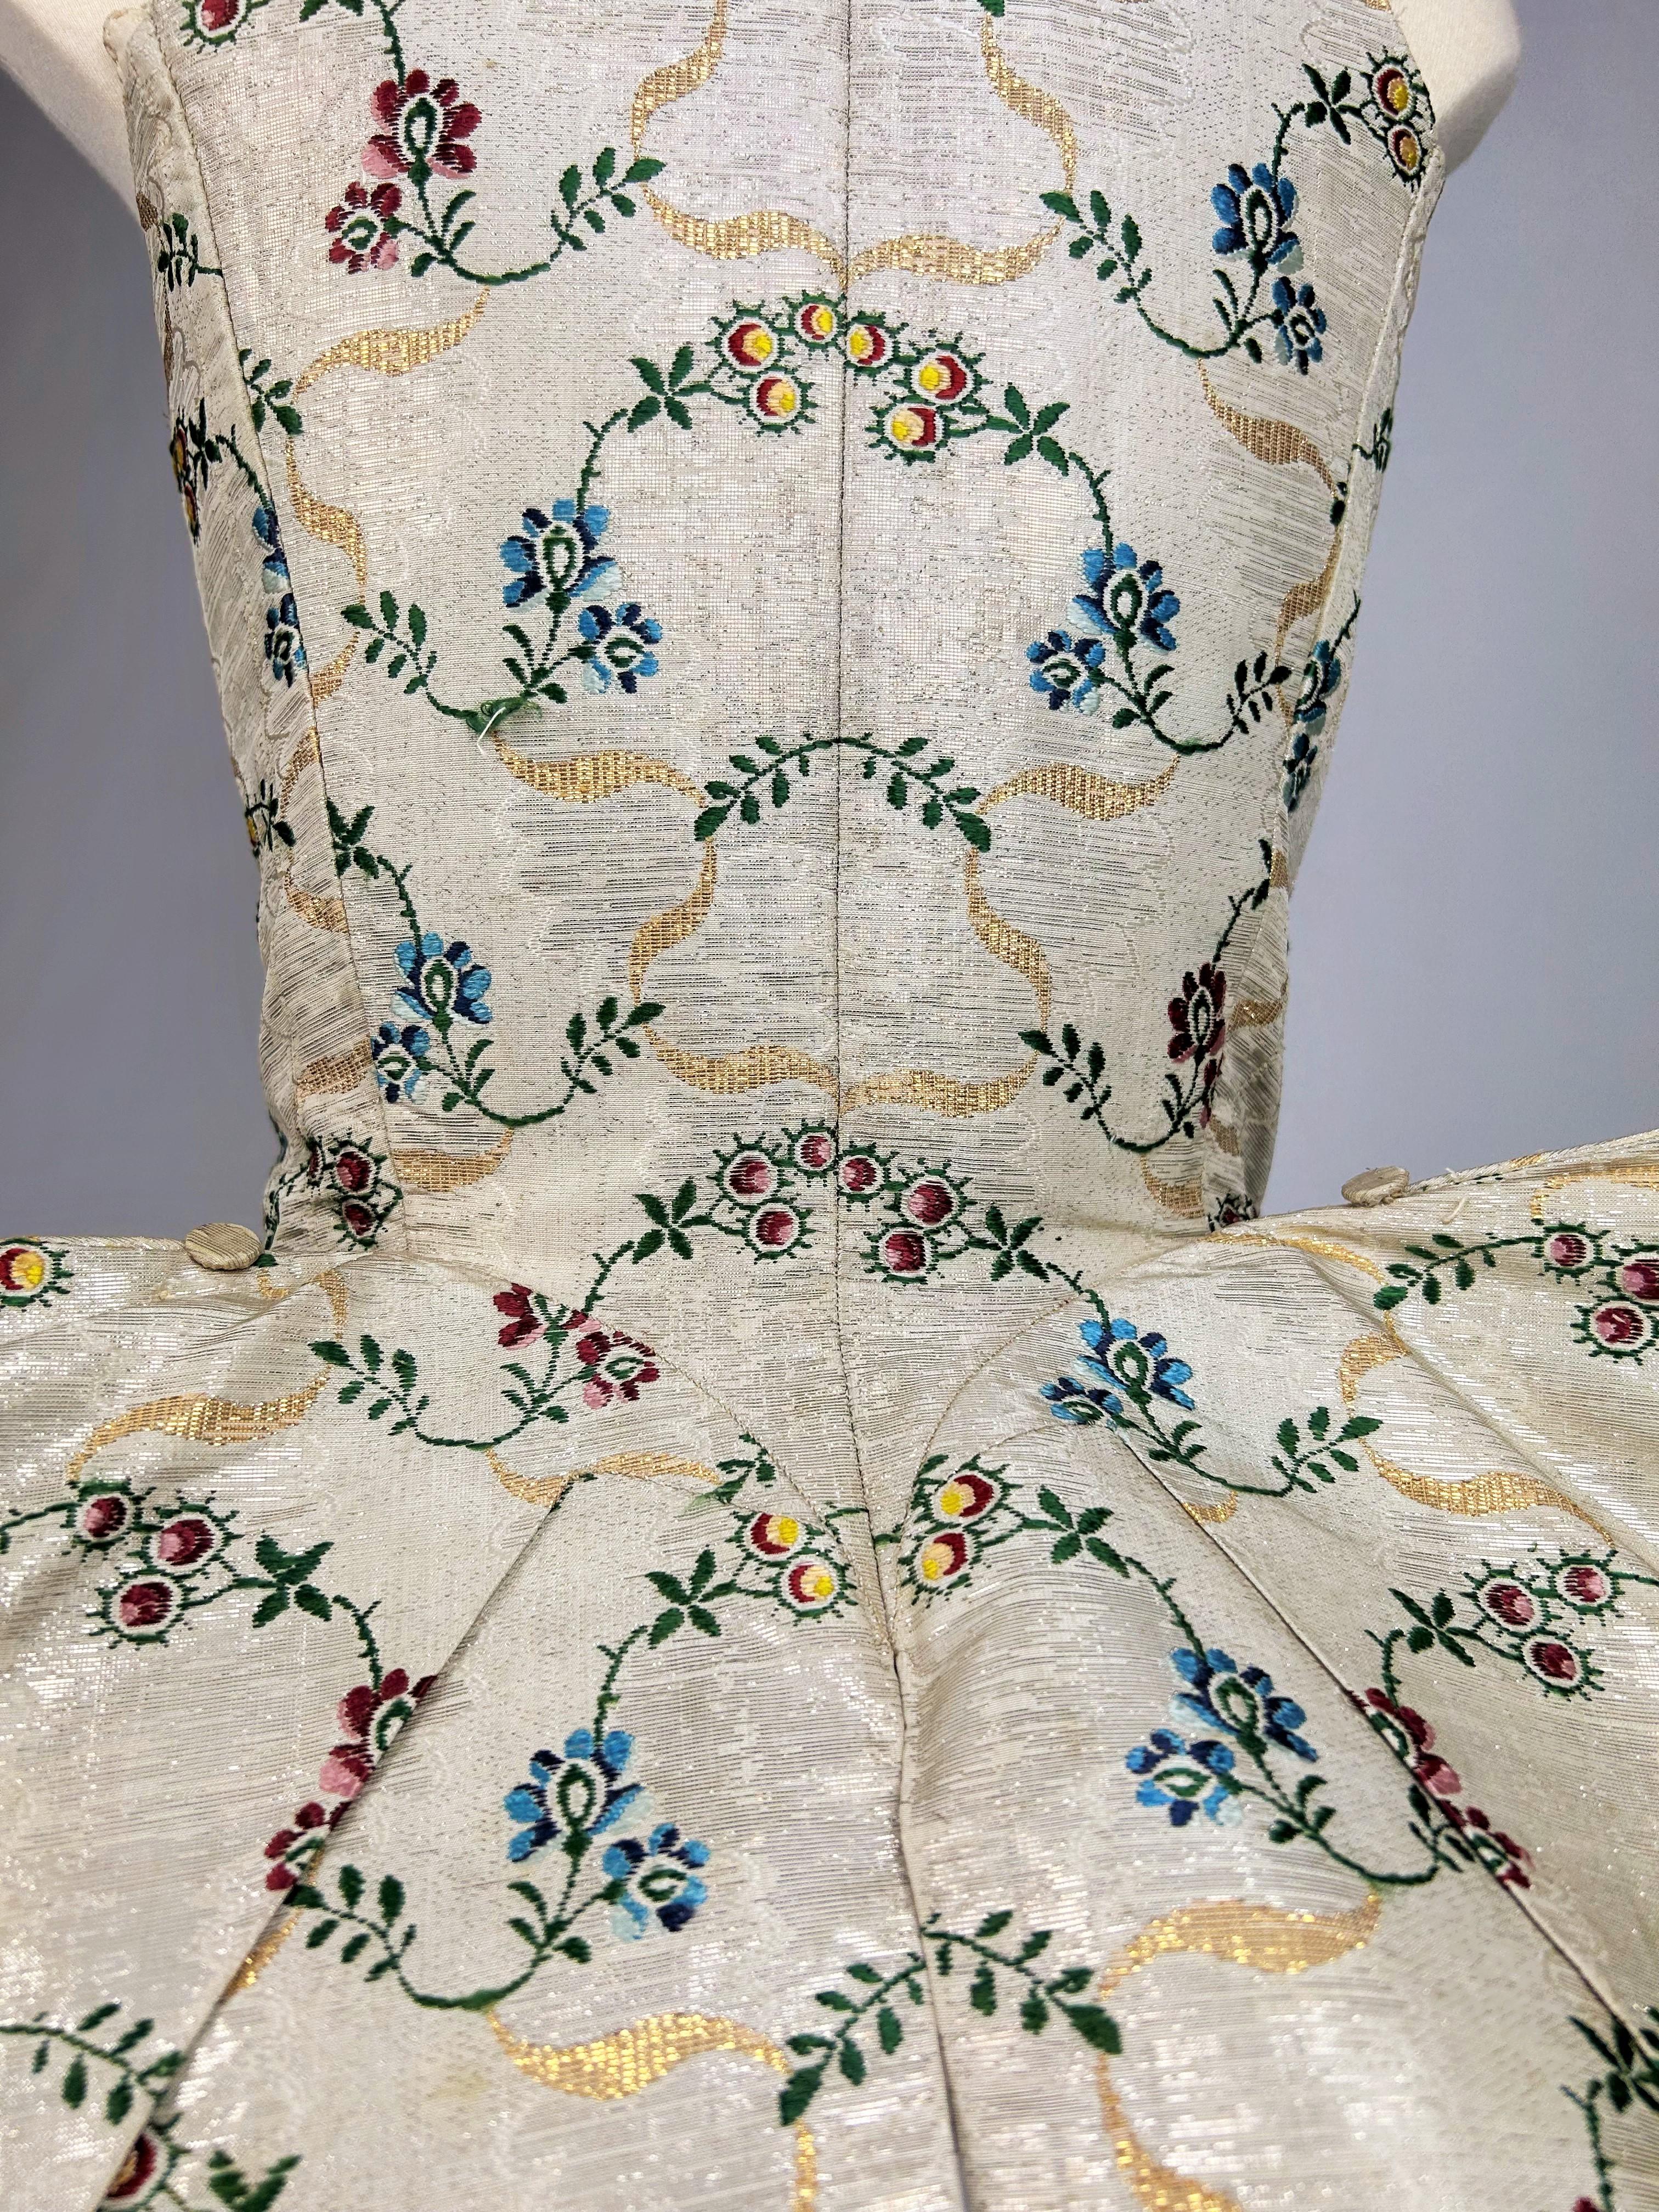 Amazon bodice in silver and gold lamé cloth - England or Europe Circa 1750-1760 For Sale 1